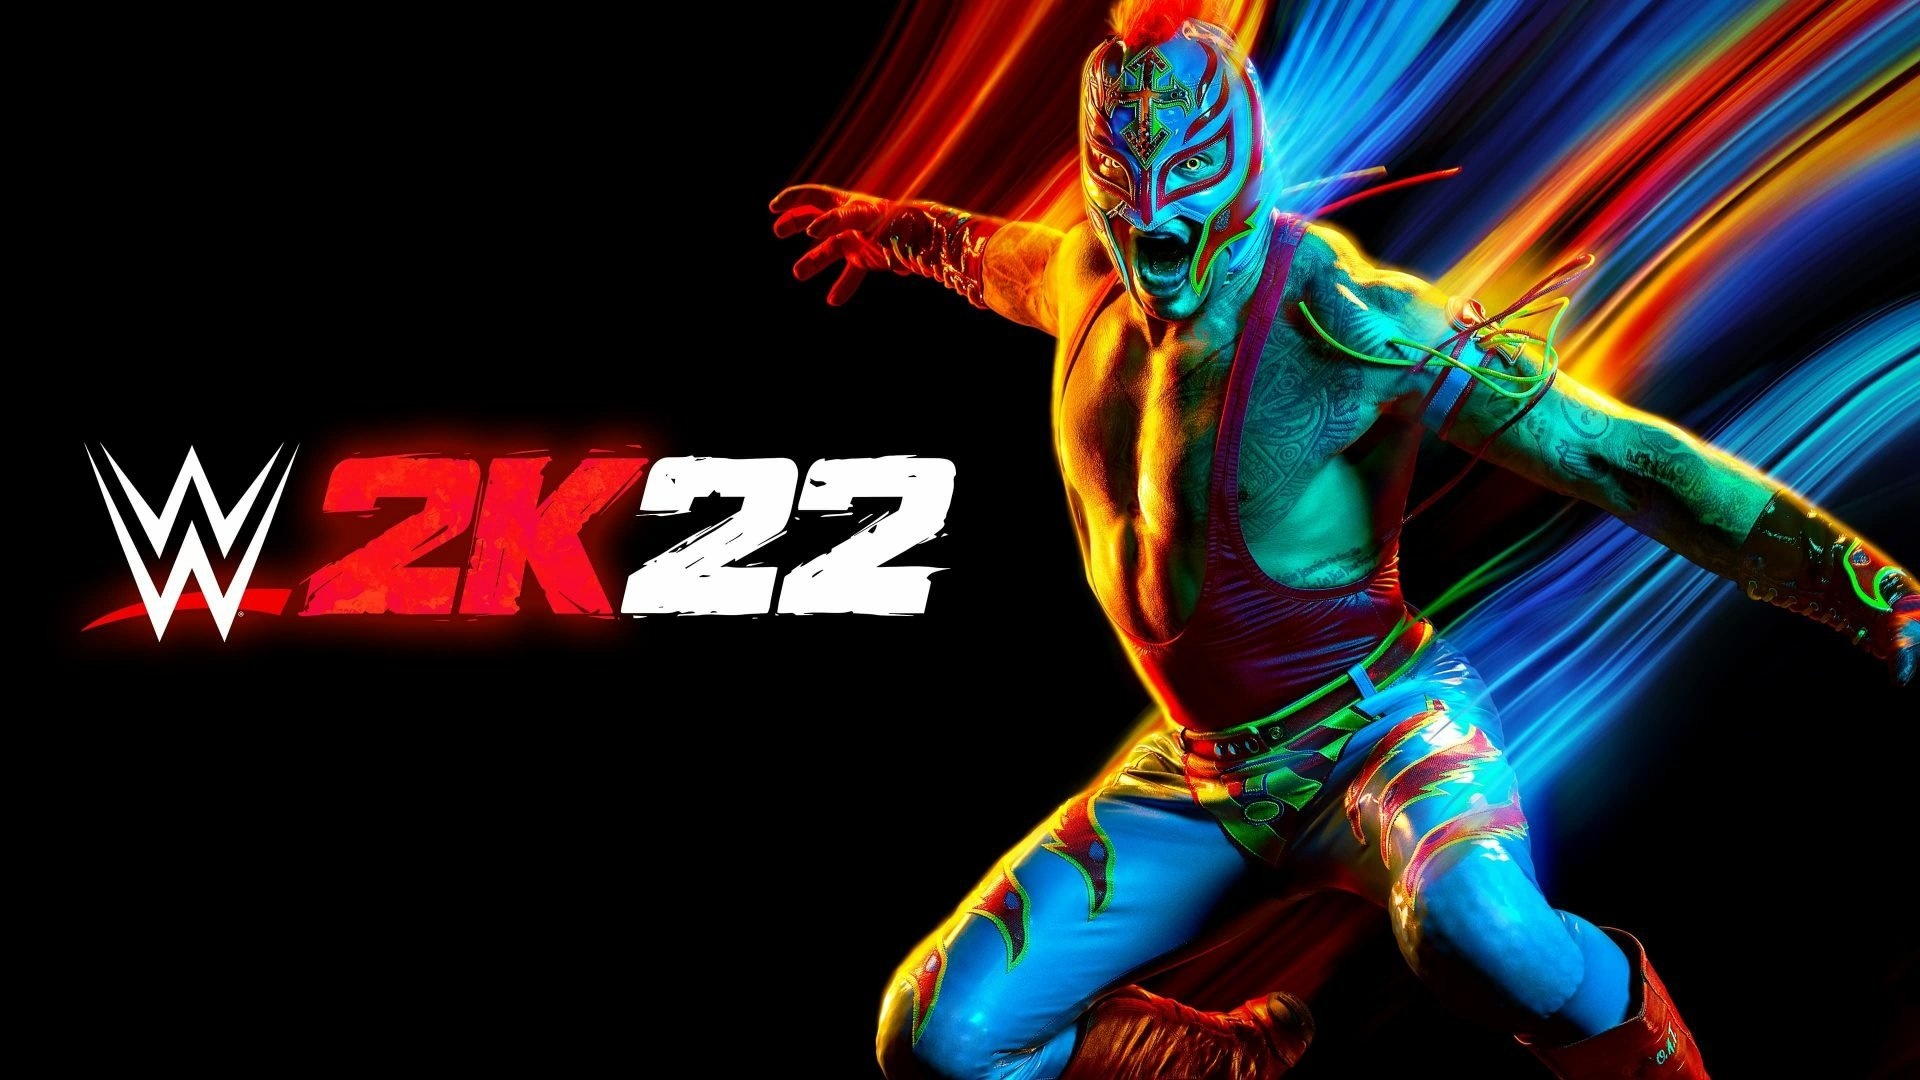 Wrestling: WWE 2K22 poster, A professional combat sports simulation video game. 1920x1080 Full HD Wallpaper.